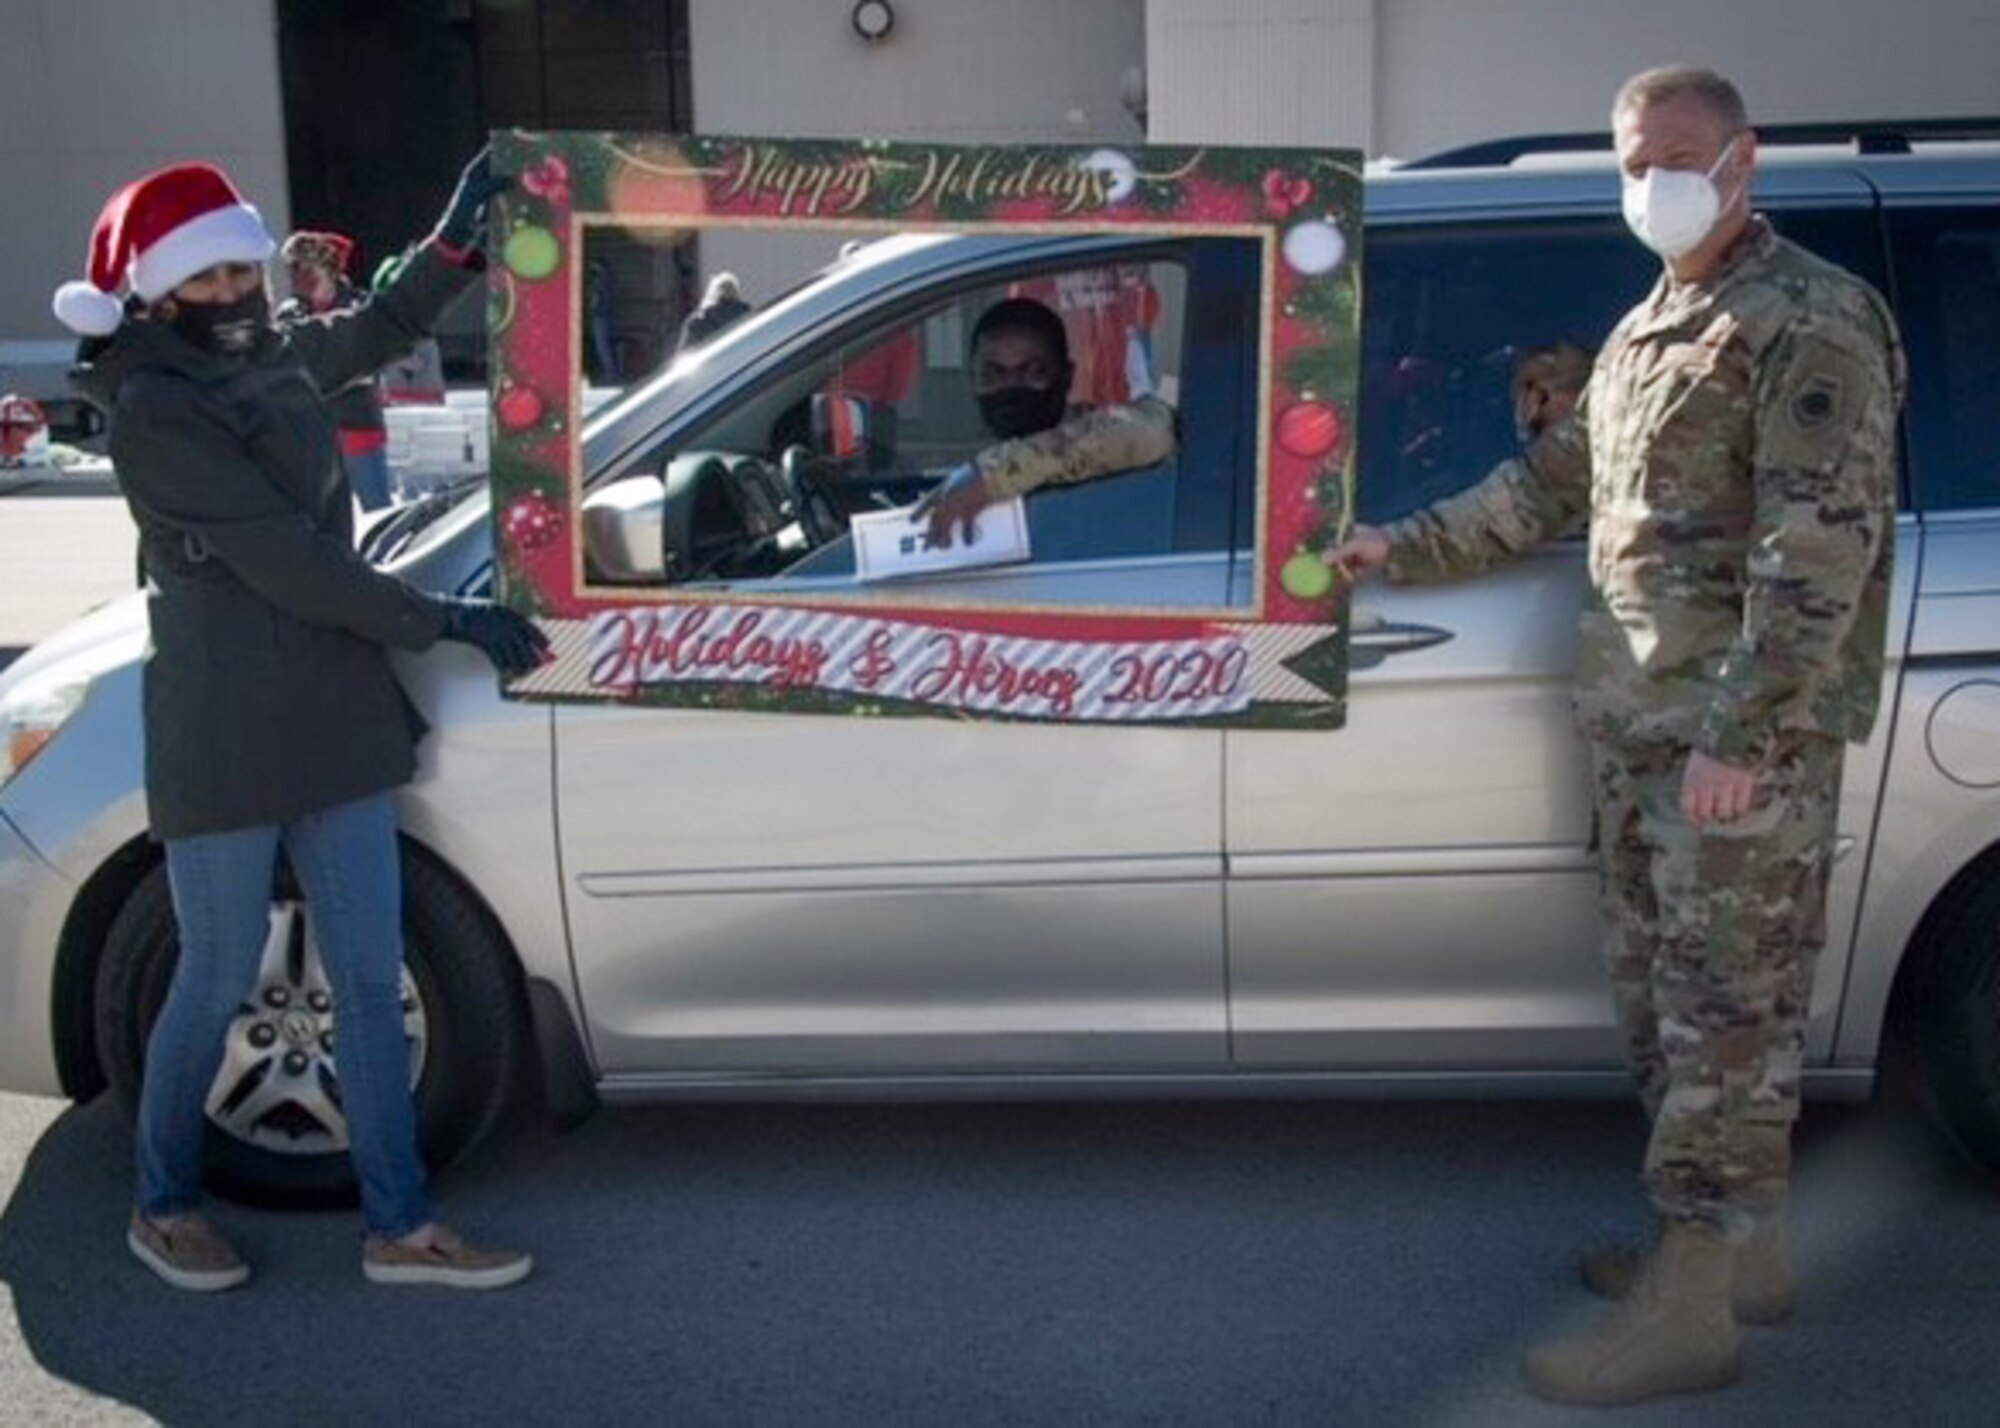 (Left) Mrs. Anne Pottinger, Fort Worth community leader, and Col. Allen Duckworth (right), 301st Fighter Wing commander, participate in the drive-thru Holidays & Heroes event Sunday, Dec. 6, 2020, at U.S. Naval Air Station Joint Reserve Base Fort Worth, Texas. The annual Holidays & Heroes event, which connects community members and businesses with military families who could use a little extra help during the holiday season, assisted more than 105 families from the Navy, Marines, and Air Force this year. (U.S. Air Force photo by Senior Airman William Downs)